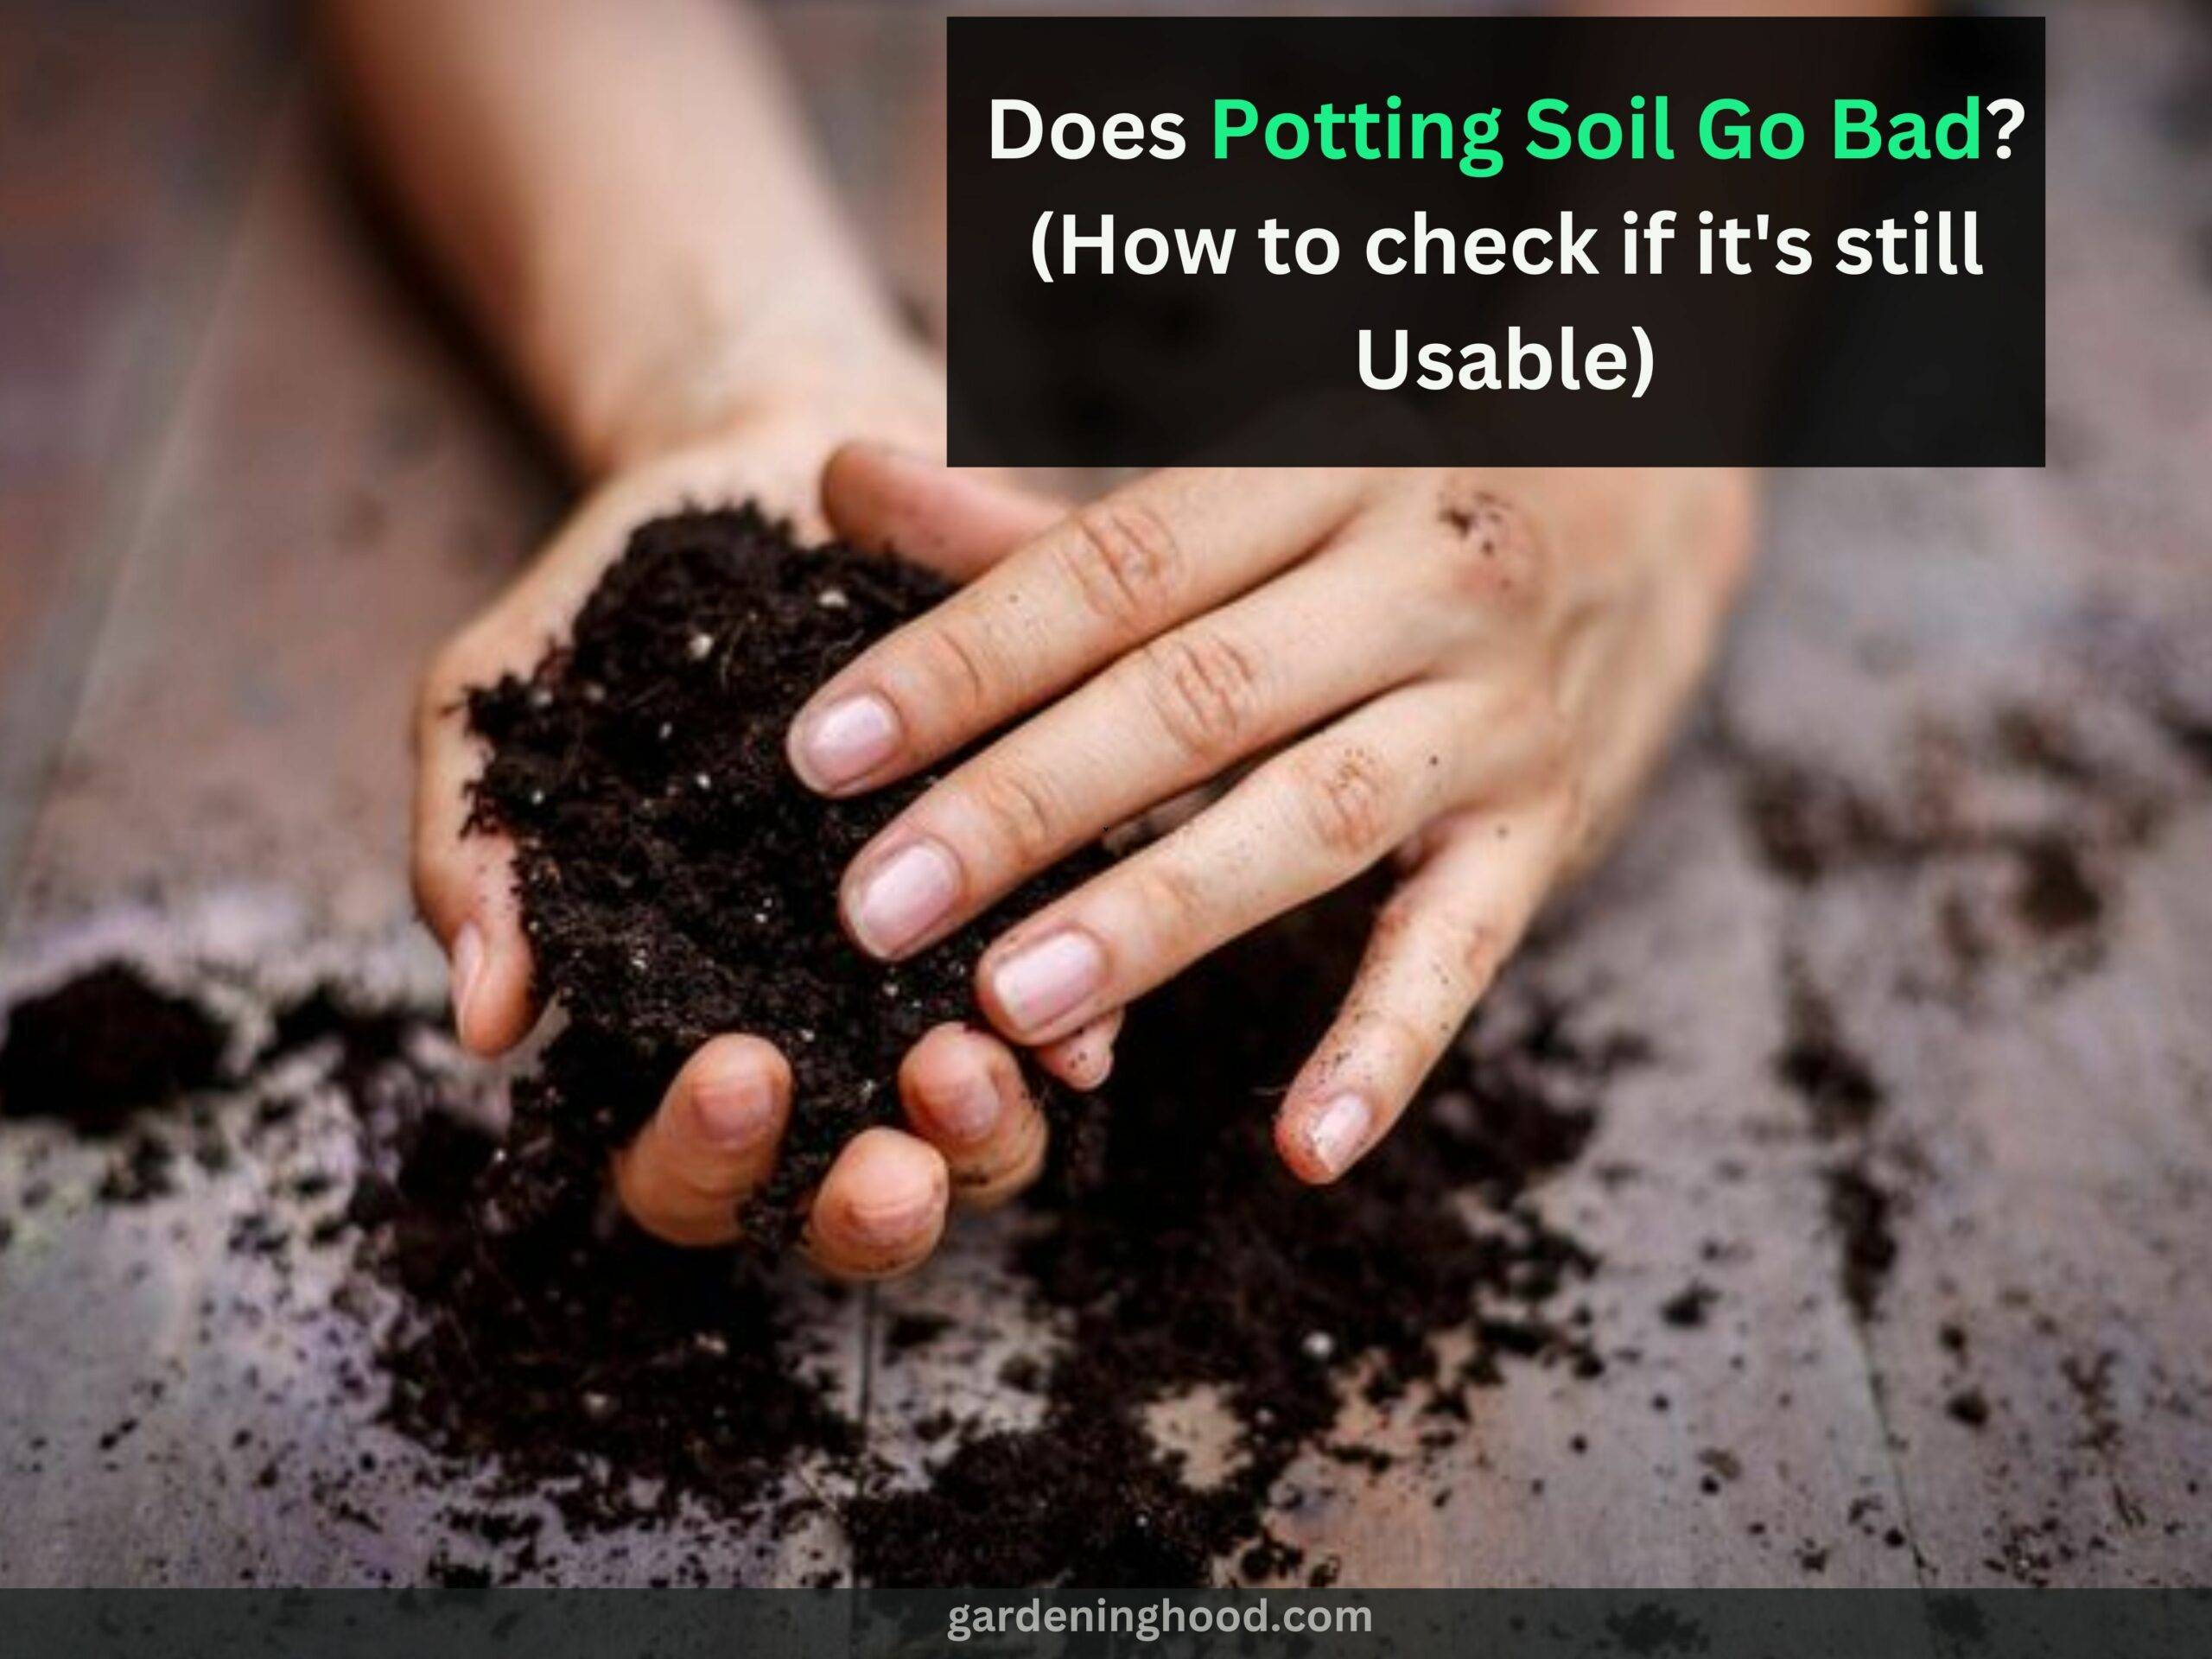 Does Potting Soil Go Bad? (How to check if it's still Usable)